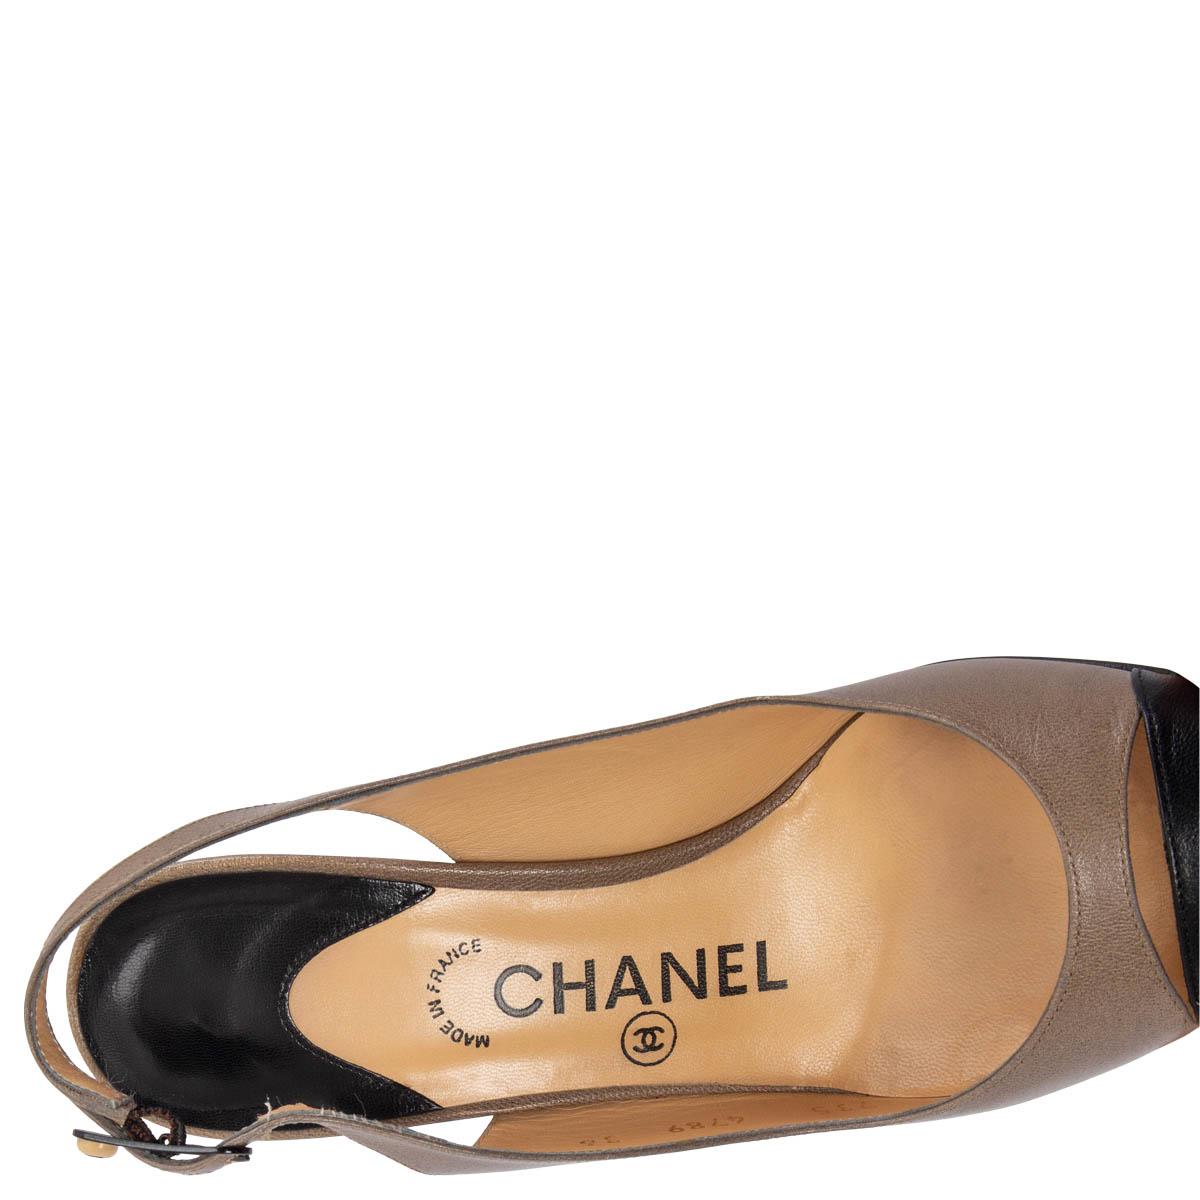 CHANEL taupe & black leather Pointed Toe Slingbacks Shoes 36 2